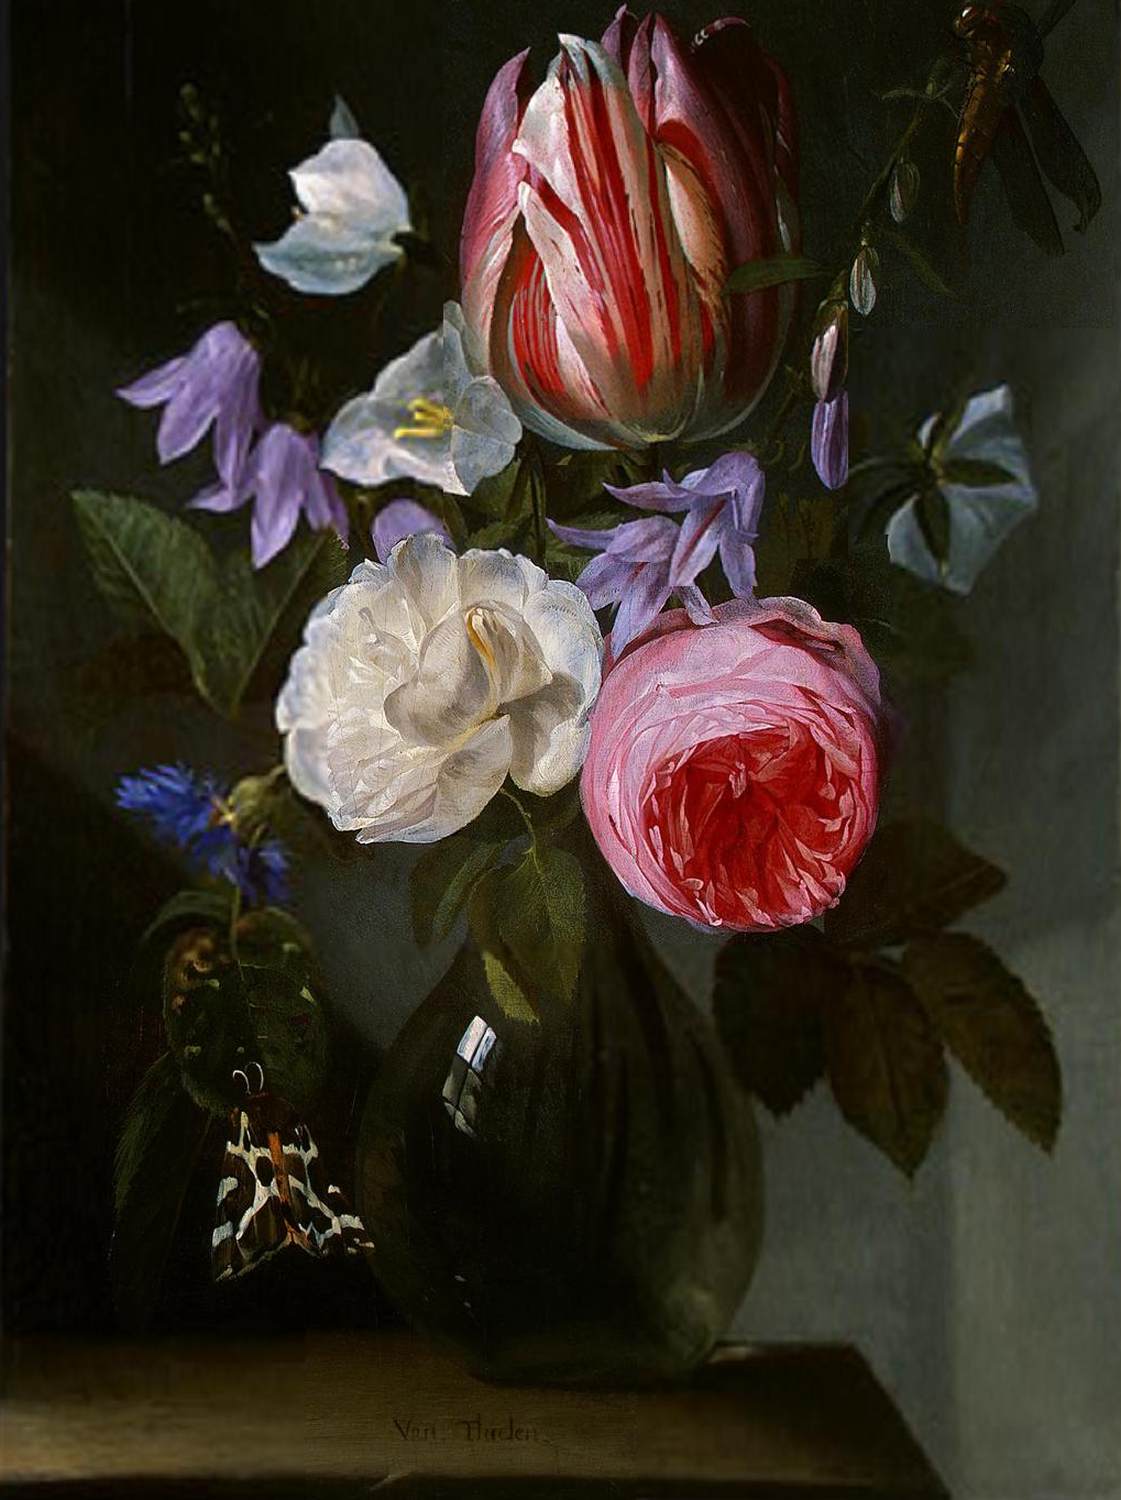 Roses and a Tulip in a Glass Vase